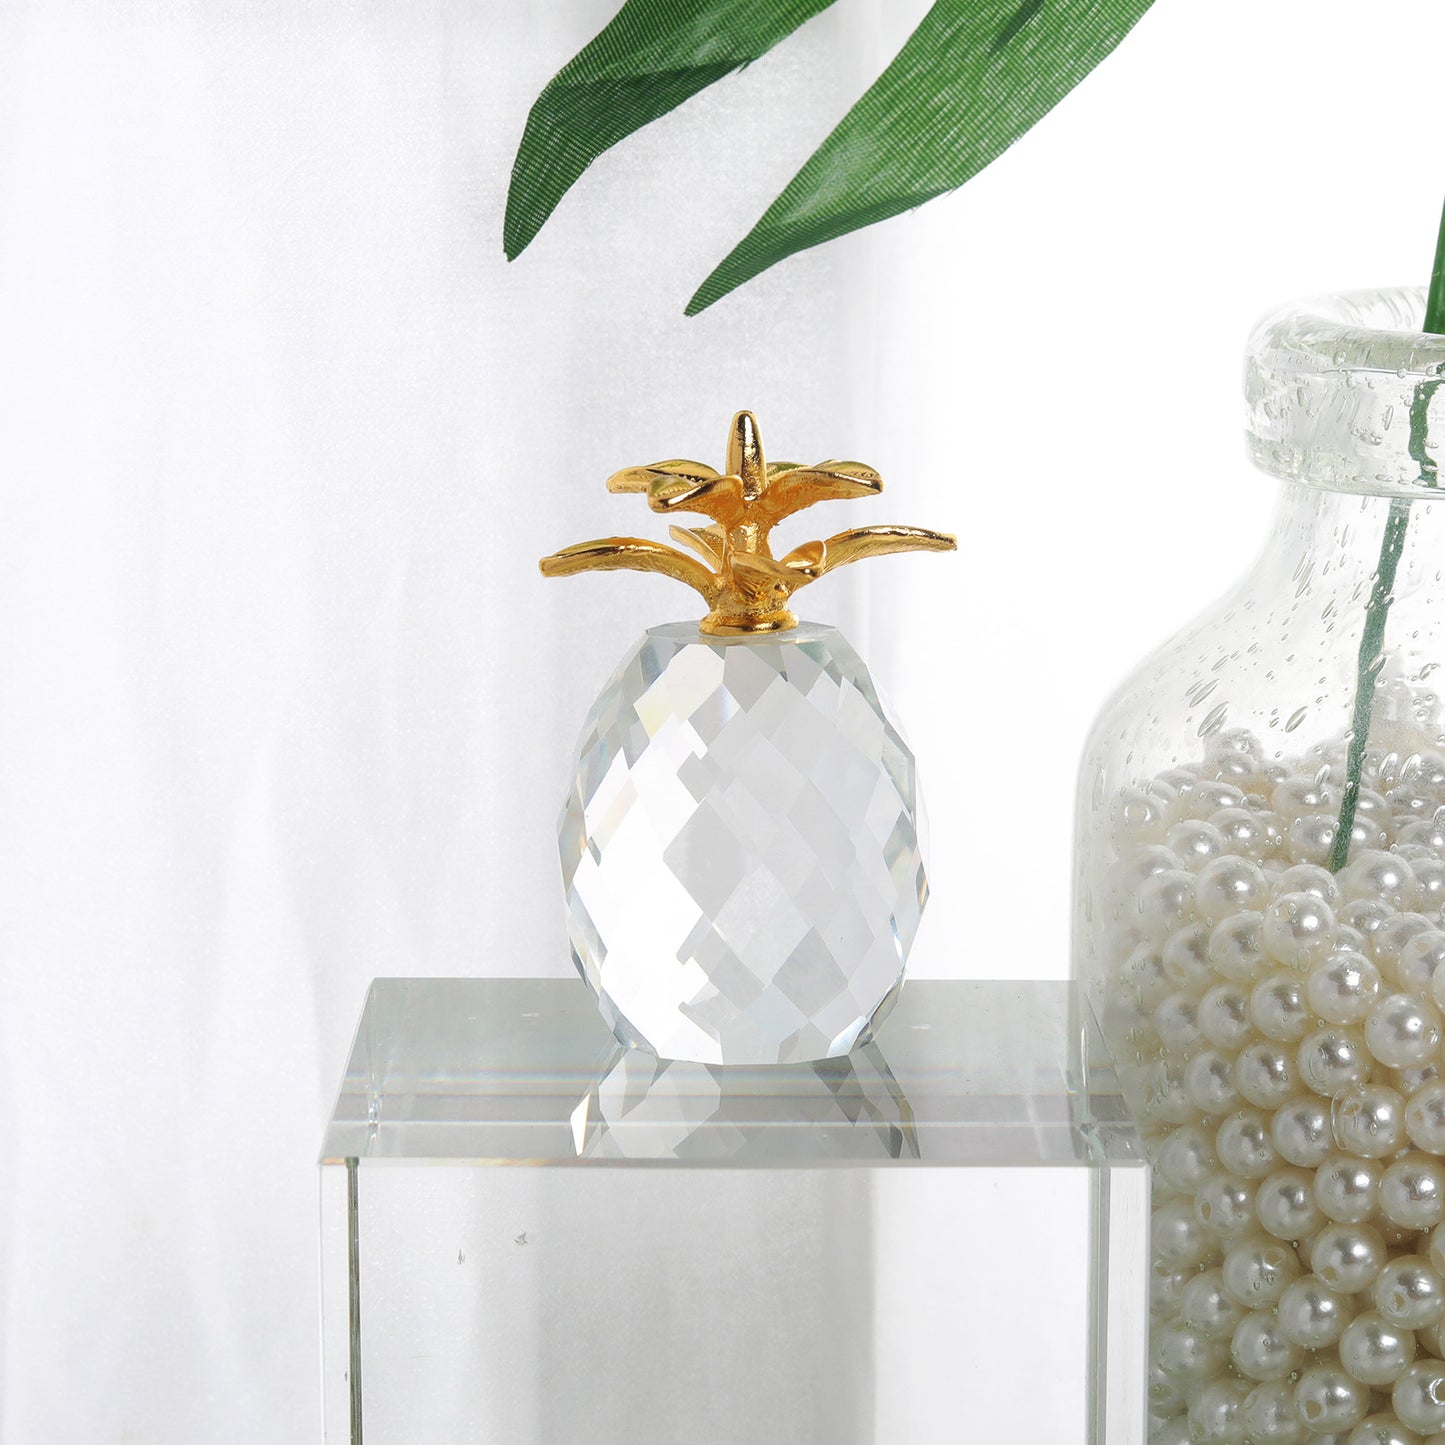 Crystal Pineapple Figurine with Golden Leaves